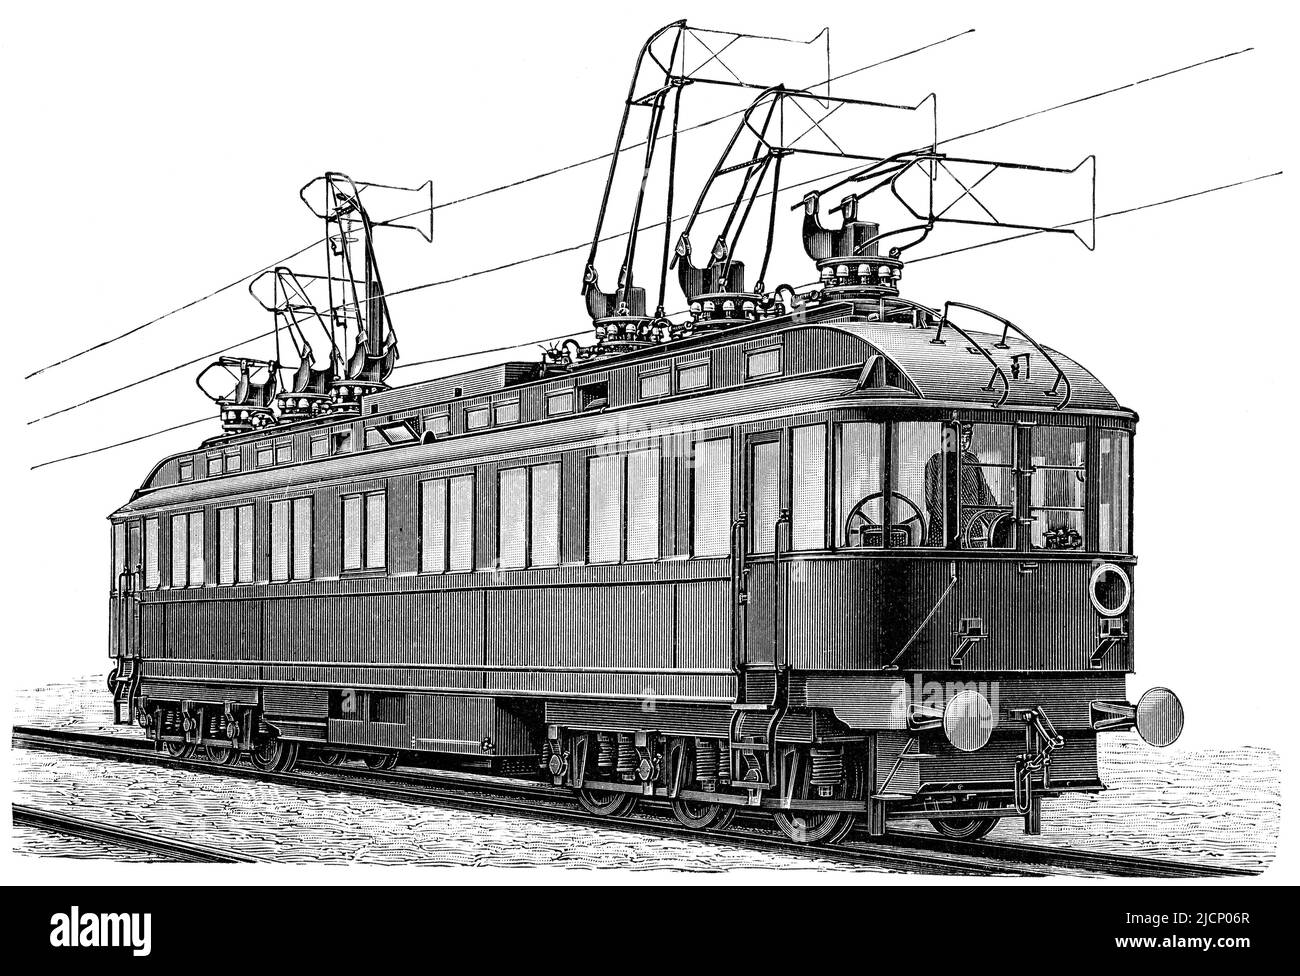 Motor car of the electric rapid transit system. Publication of the book 'Meyers Konversations-Lexikon', Volume 2, Leipzig, Germany, 1910 Stock Photo